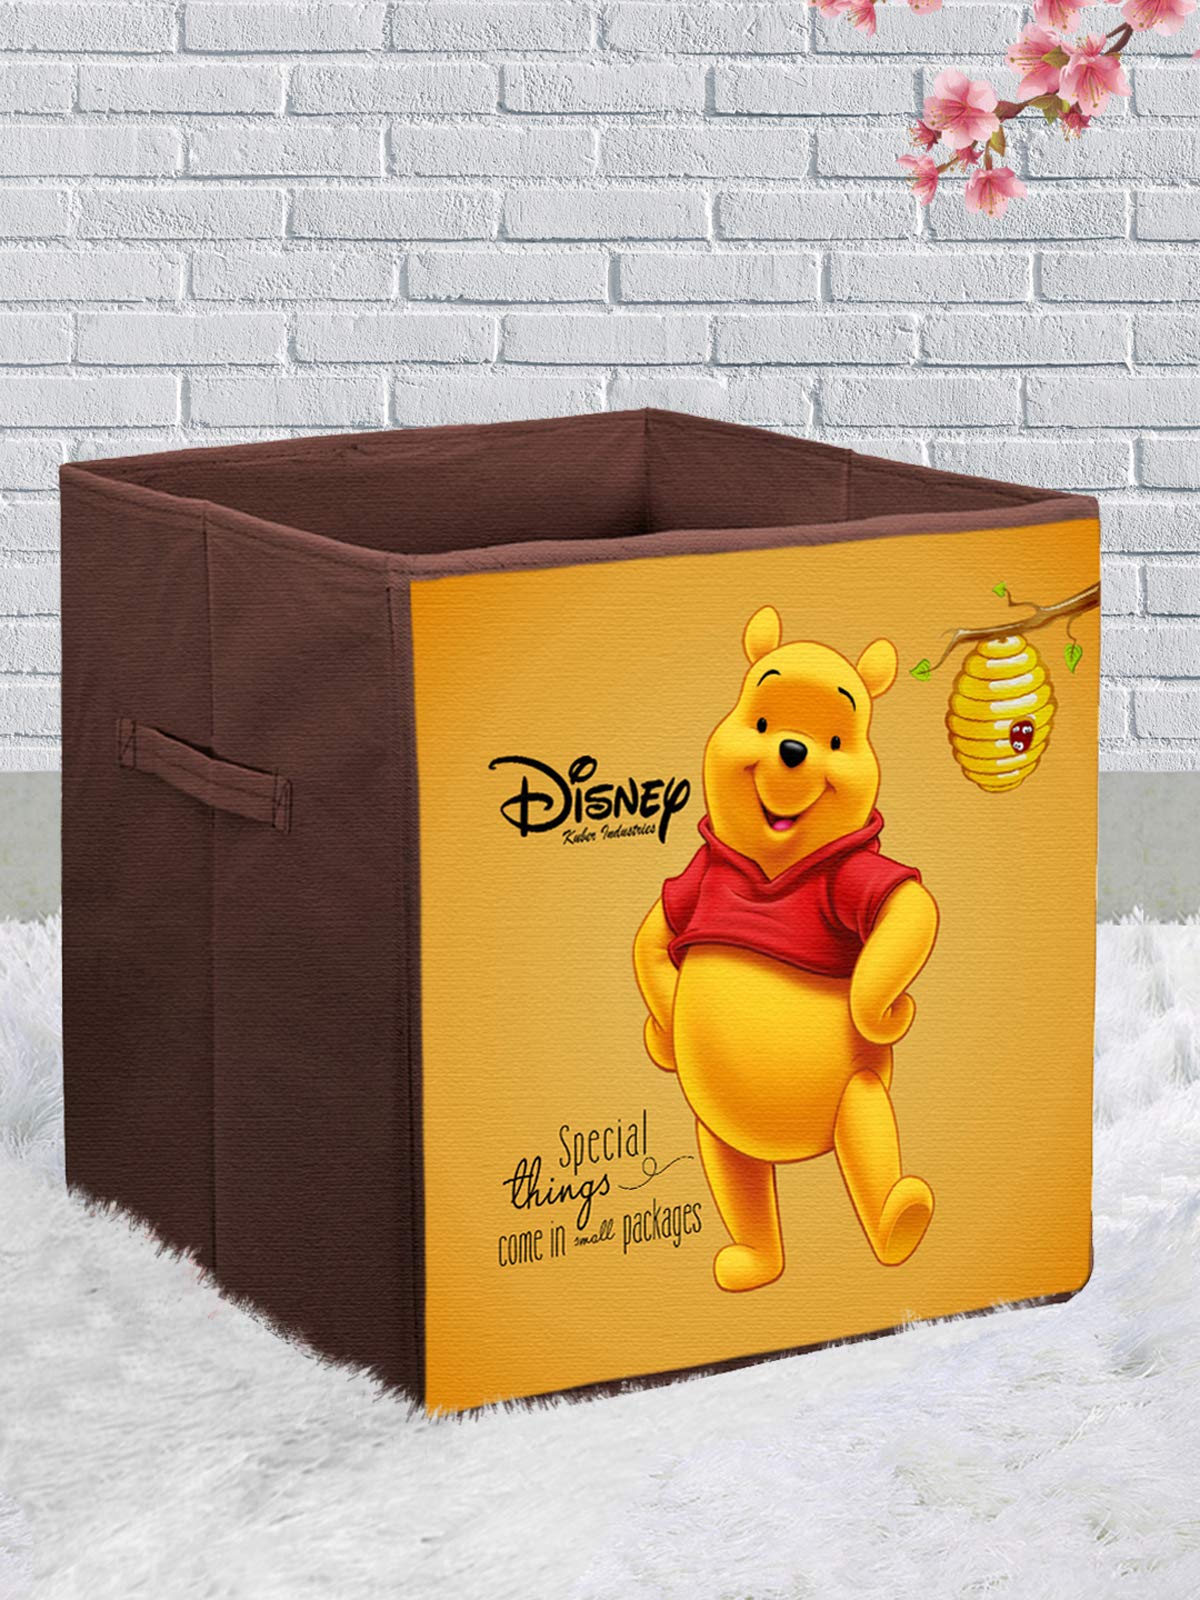 Kuber Industries Disney Winnie-The-Pooh Print Non Woven Fabric Square Foldable Wardrobe Organizer Cube Cloth Cover Storage Box with Handle (Large Size, Brown)